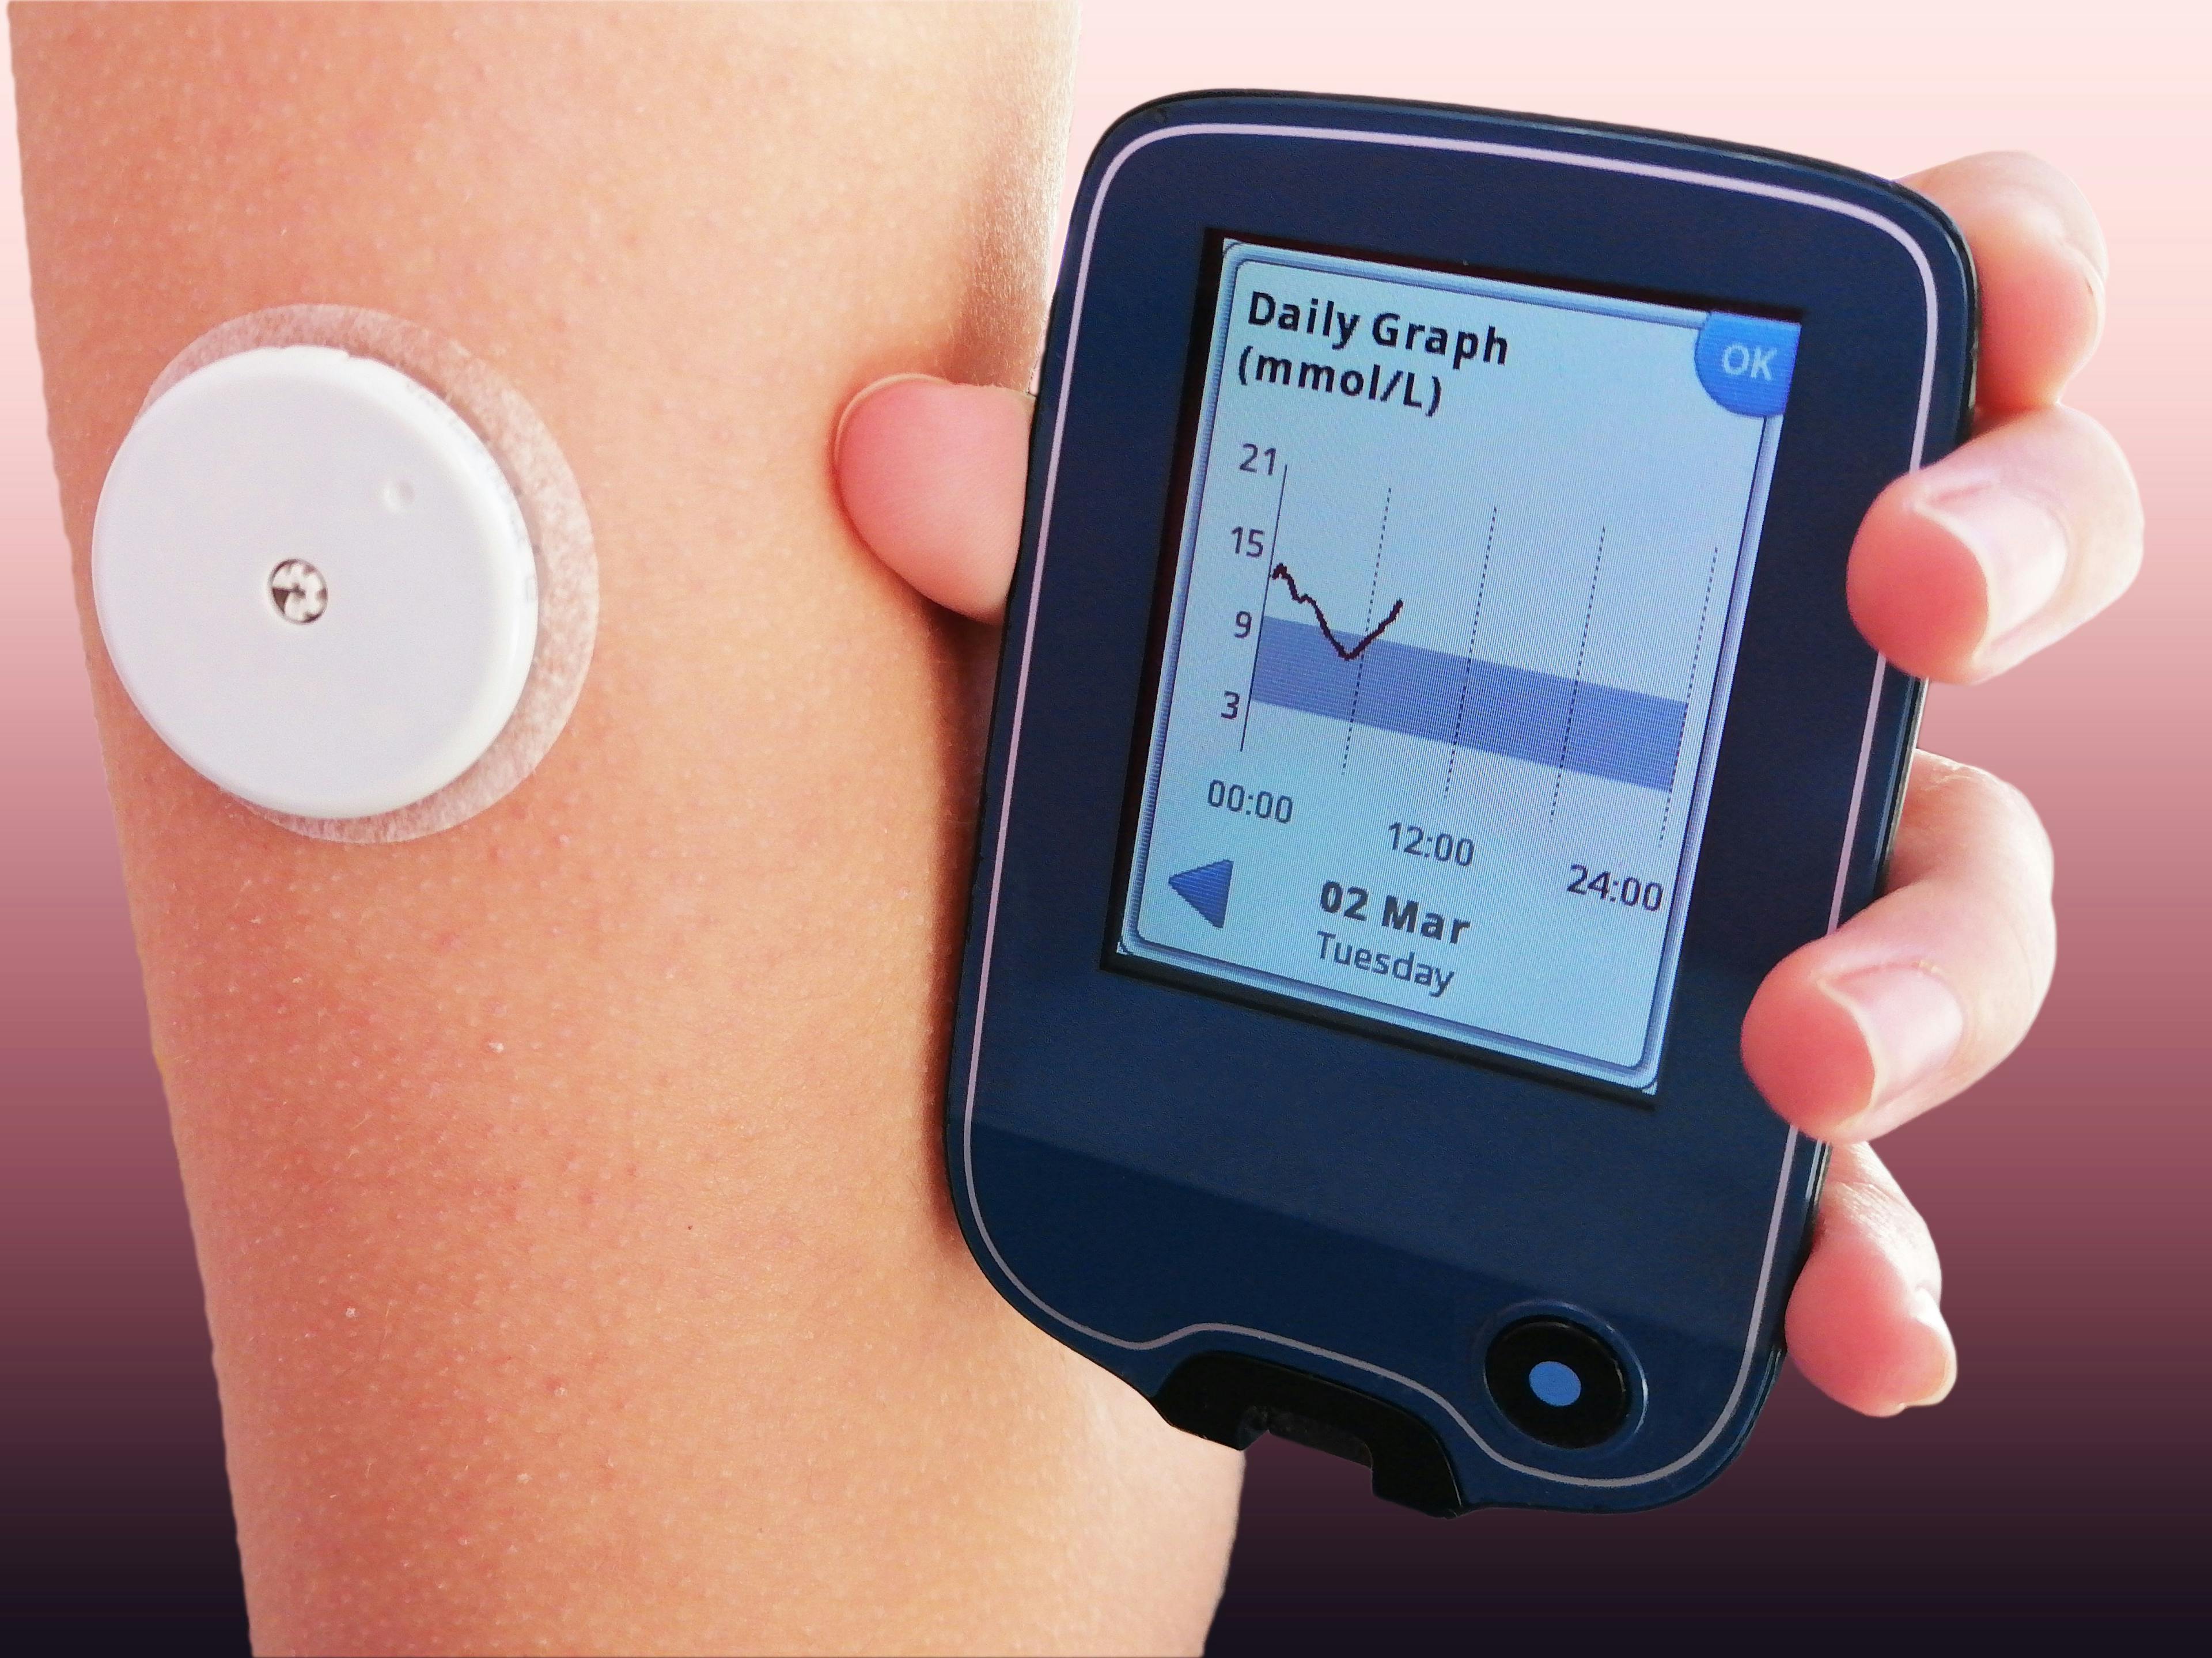 Slideshow: The Role of CGM in Diabetes Management During Pregnancy